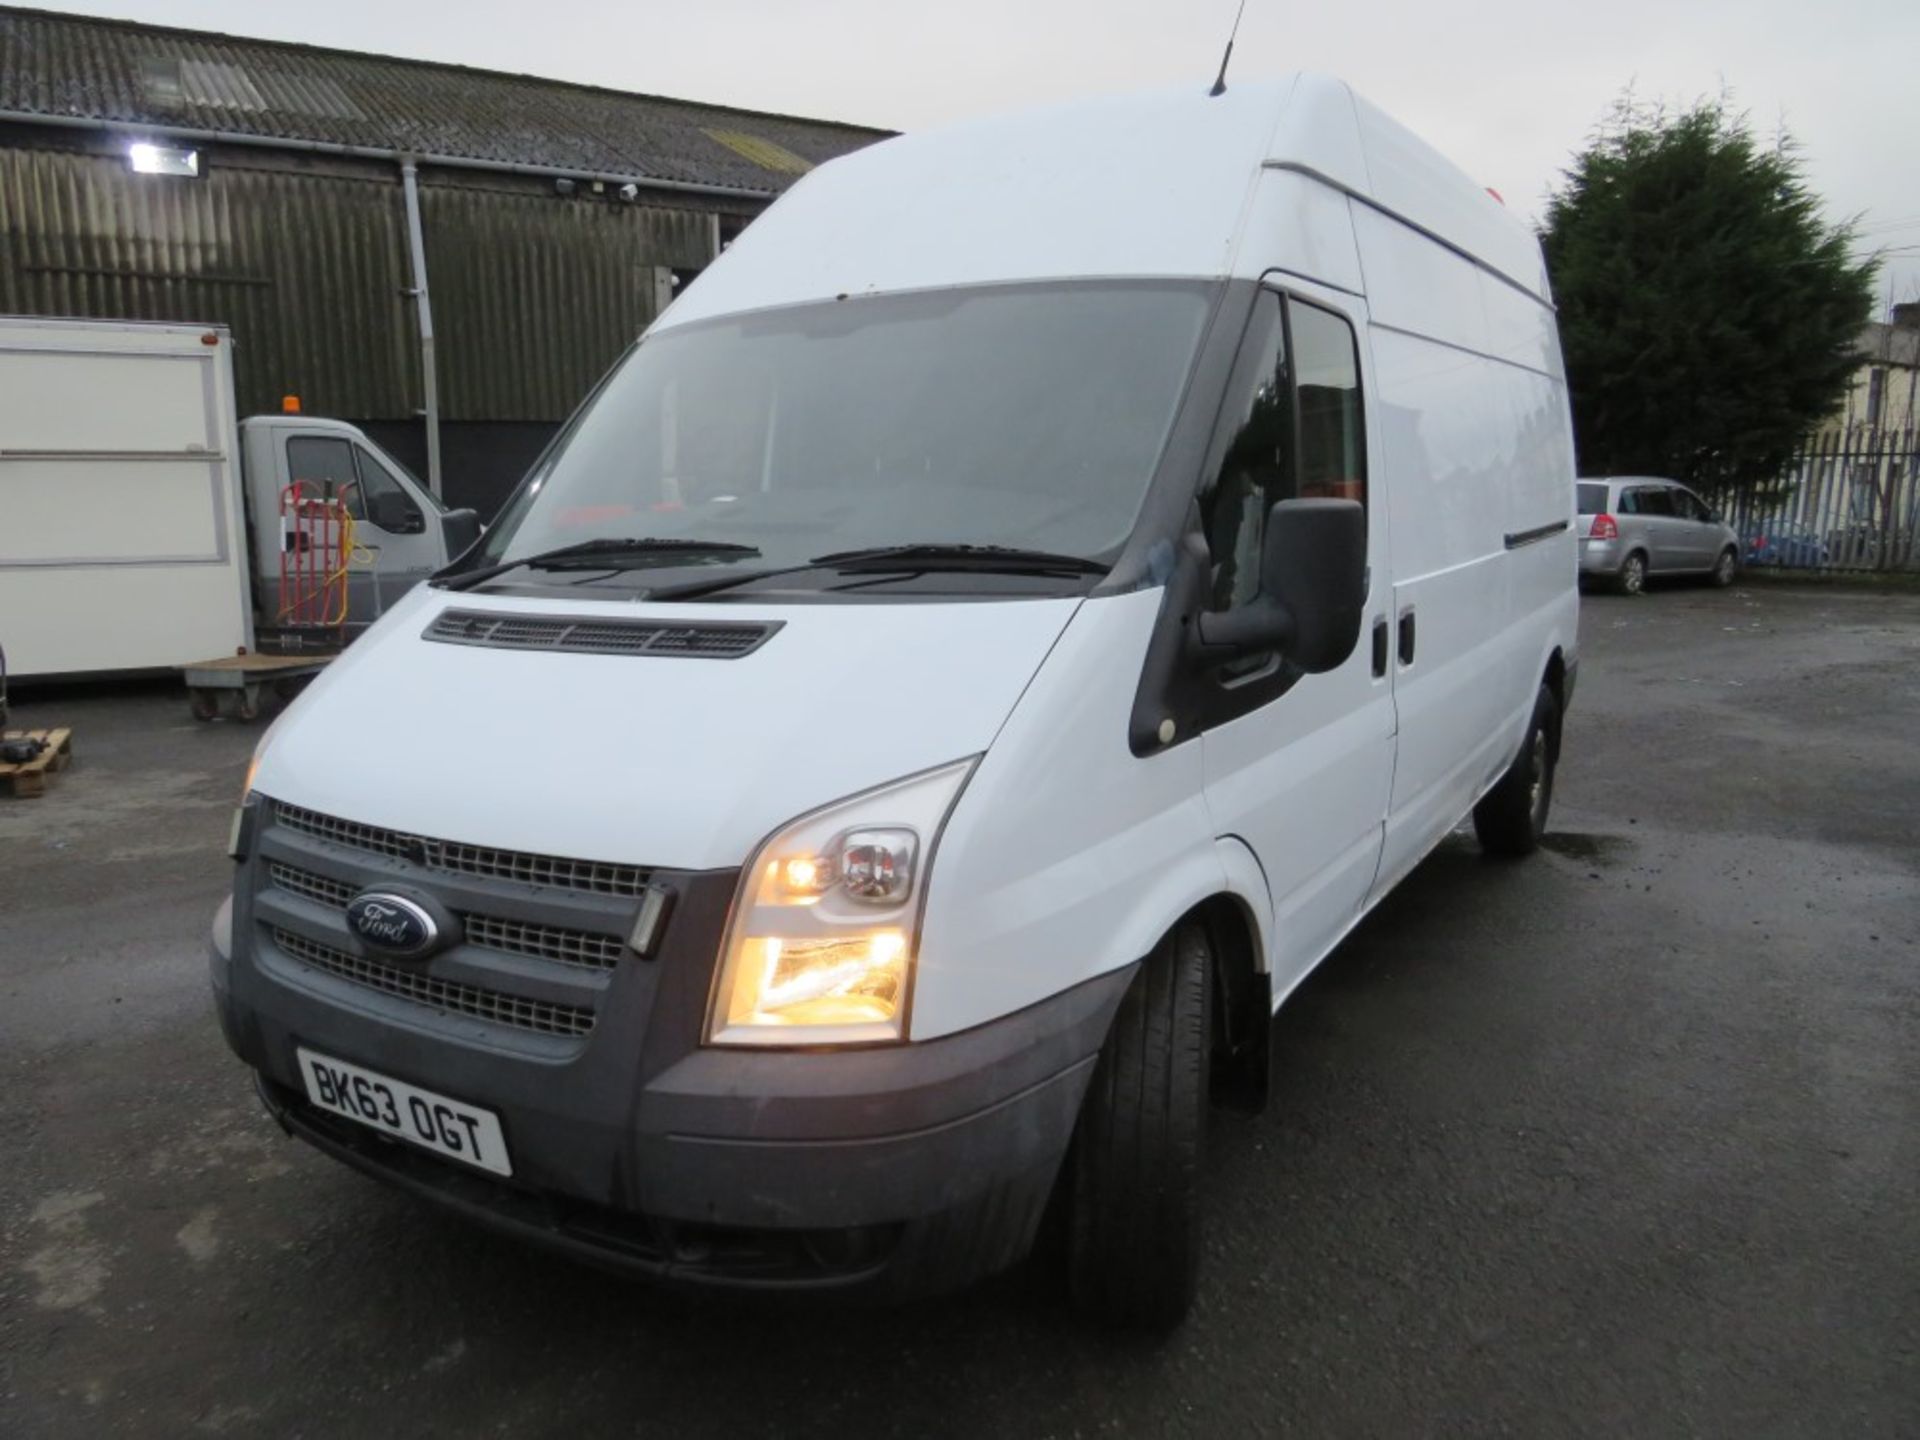 63 reg FORD TRANSIT 125 T350 RWD, 1ST REG 09/13, TEST 11/20, 72256M WARRANTED, V5 HERE, 1 OWNER FROM - Image 2 of 6